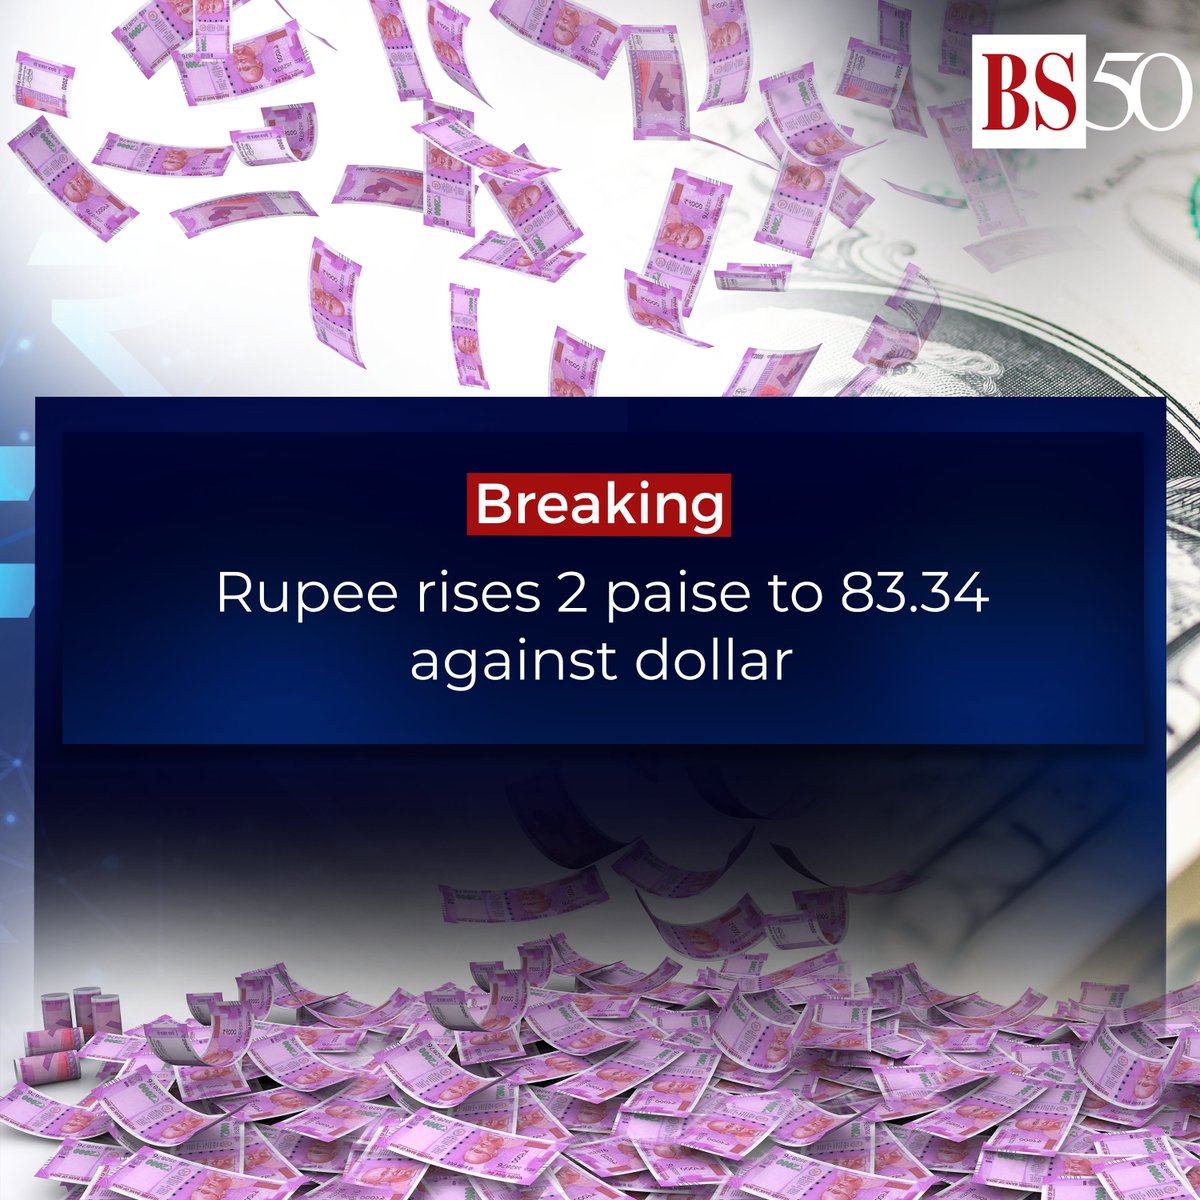 Rupee rises 2 paise to 83.34 against US dollar in early trade.

#RupeeVsDollar #IndianEconomy #Dollar #rupee